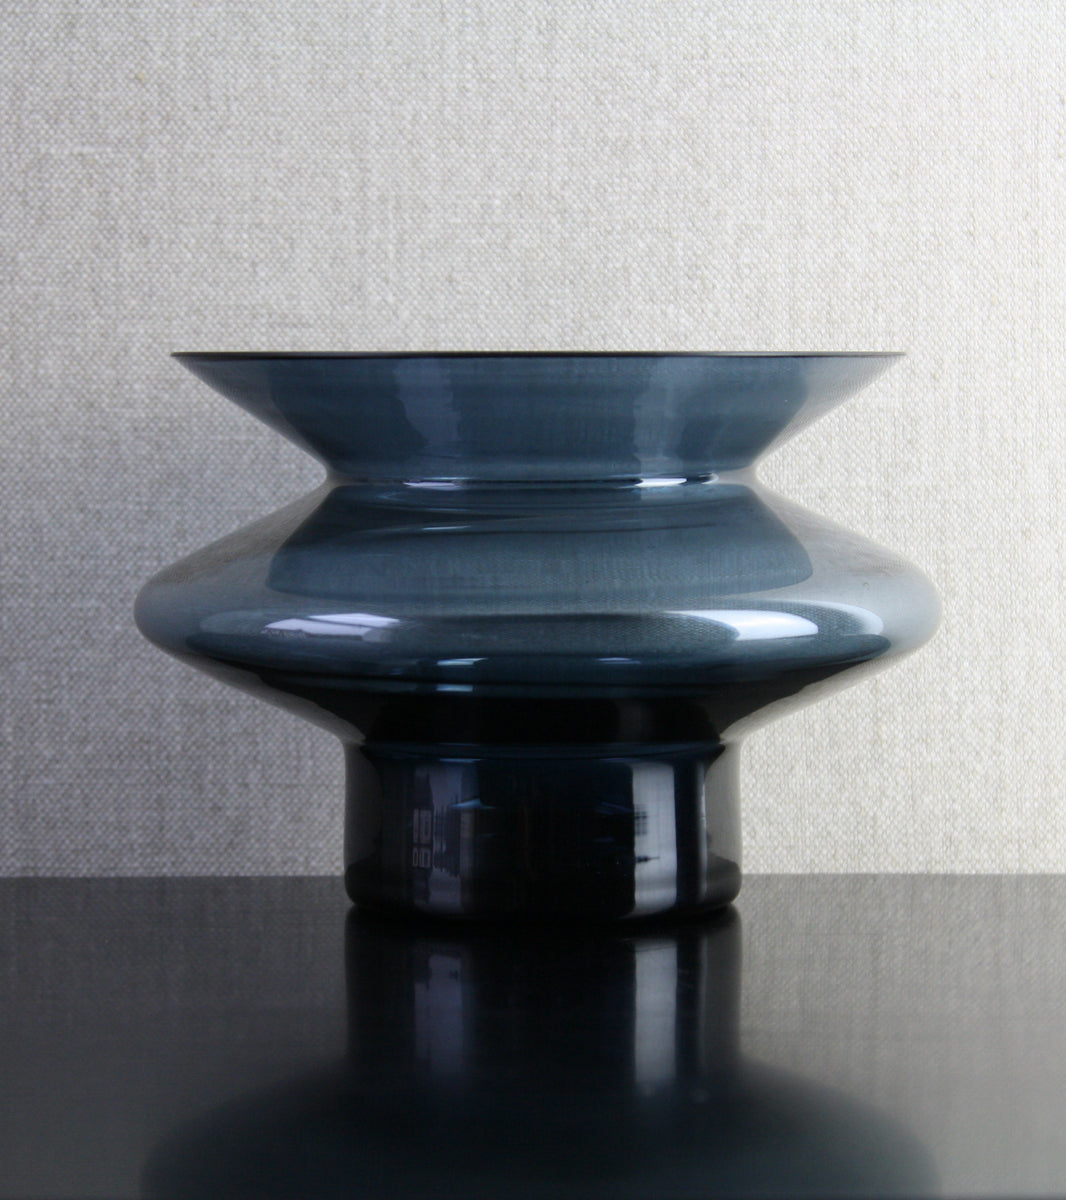 Steel Blue Model 6654 "Hyrrä" (Spinning Top) by Helena Tynell, 1959